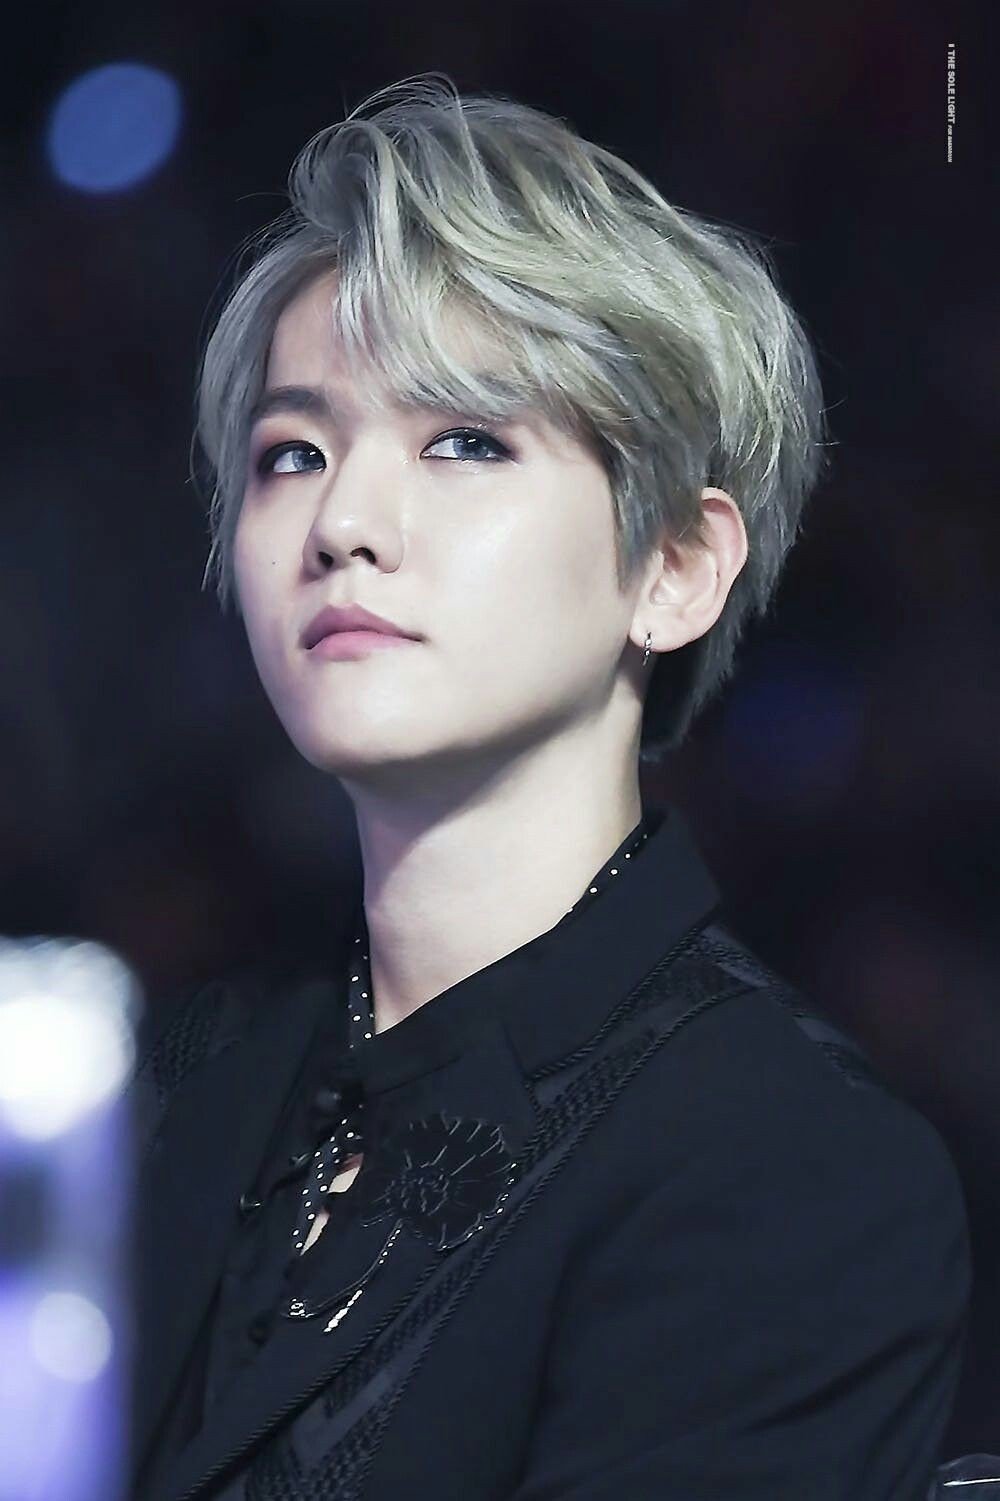 Exo S Baekhyun Spotted With Bleached Hair At Sm Entertainment Allkpop